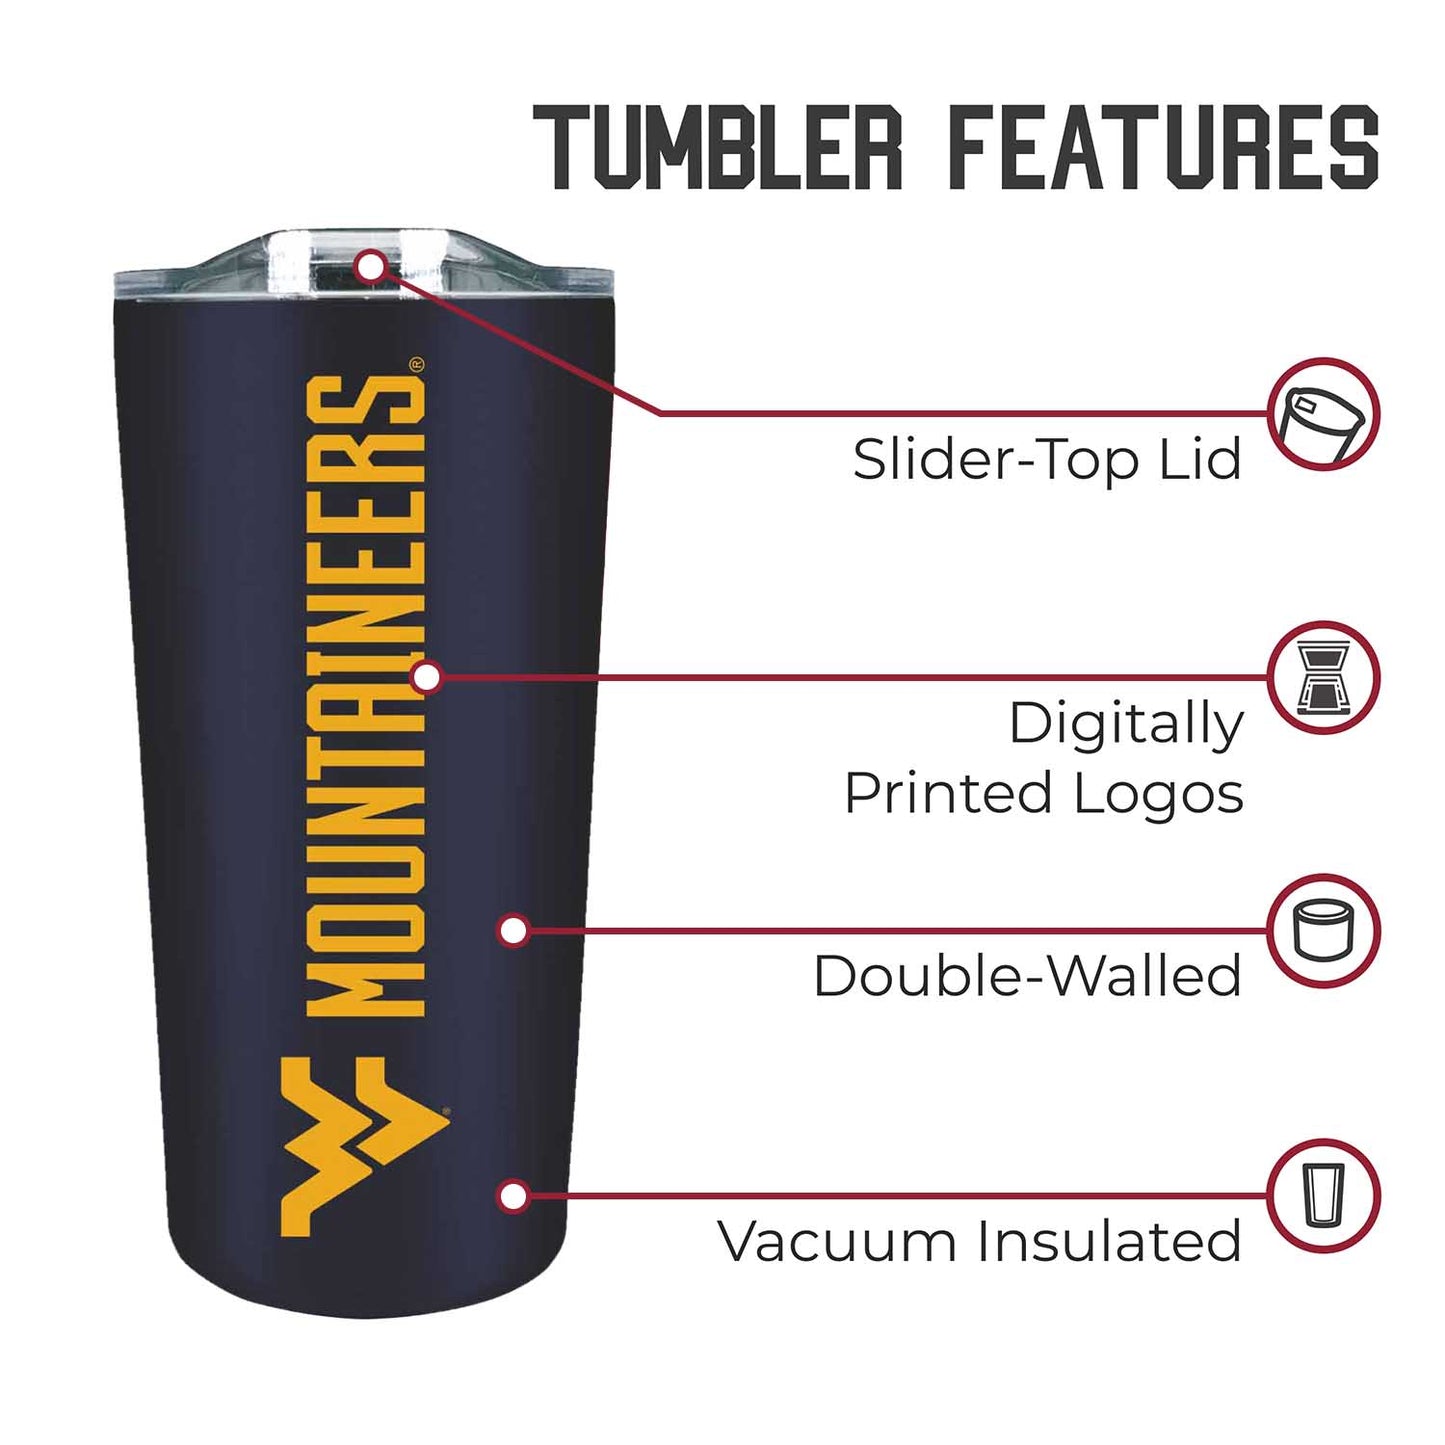 West Virginia Mountaineers NCAA Stainless Steel Tumbler perfect for Gameday - Navy